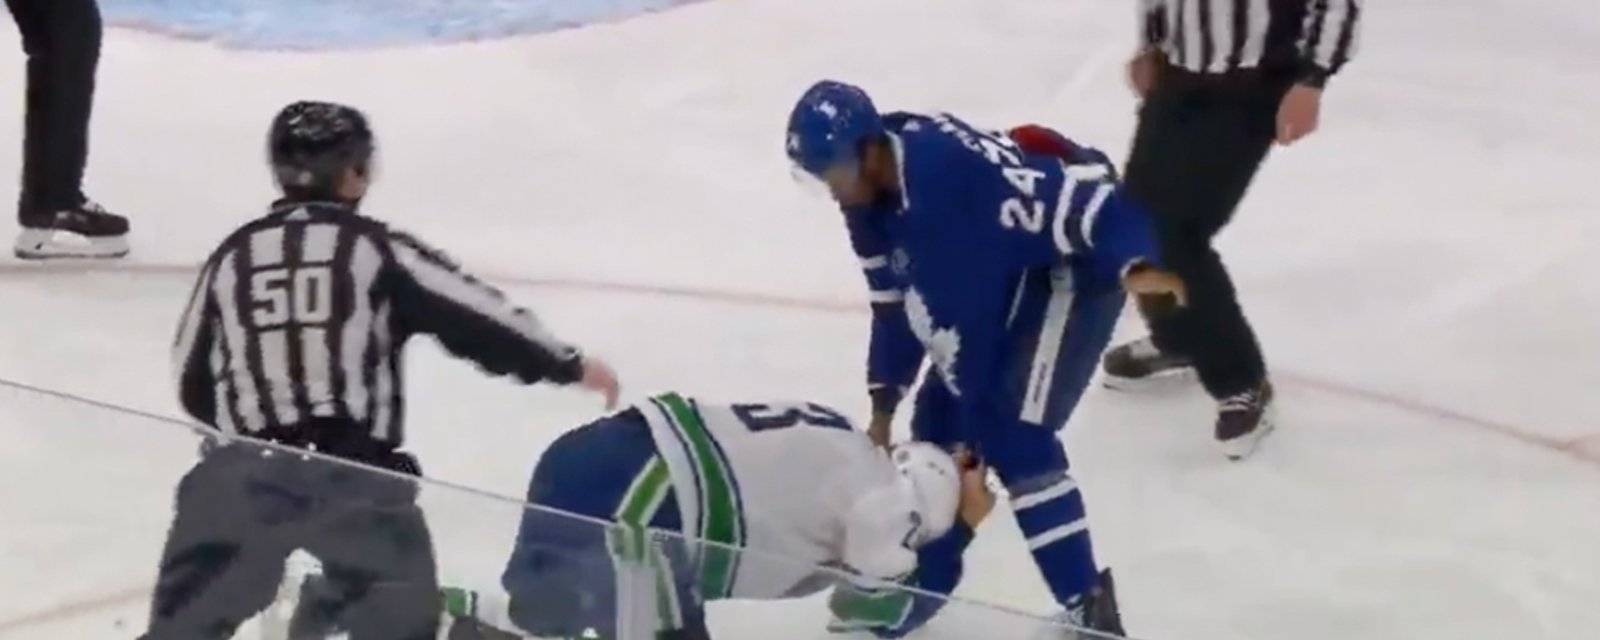 Edler finally pays for hit on Hyman, gets lit up by Simmonds